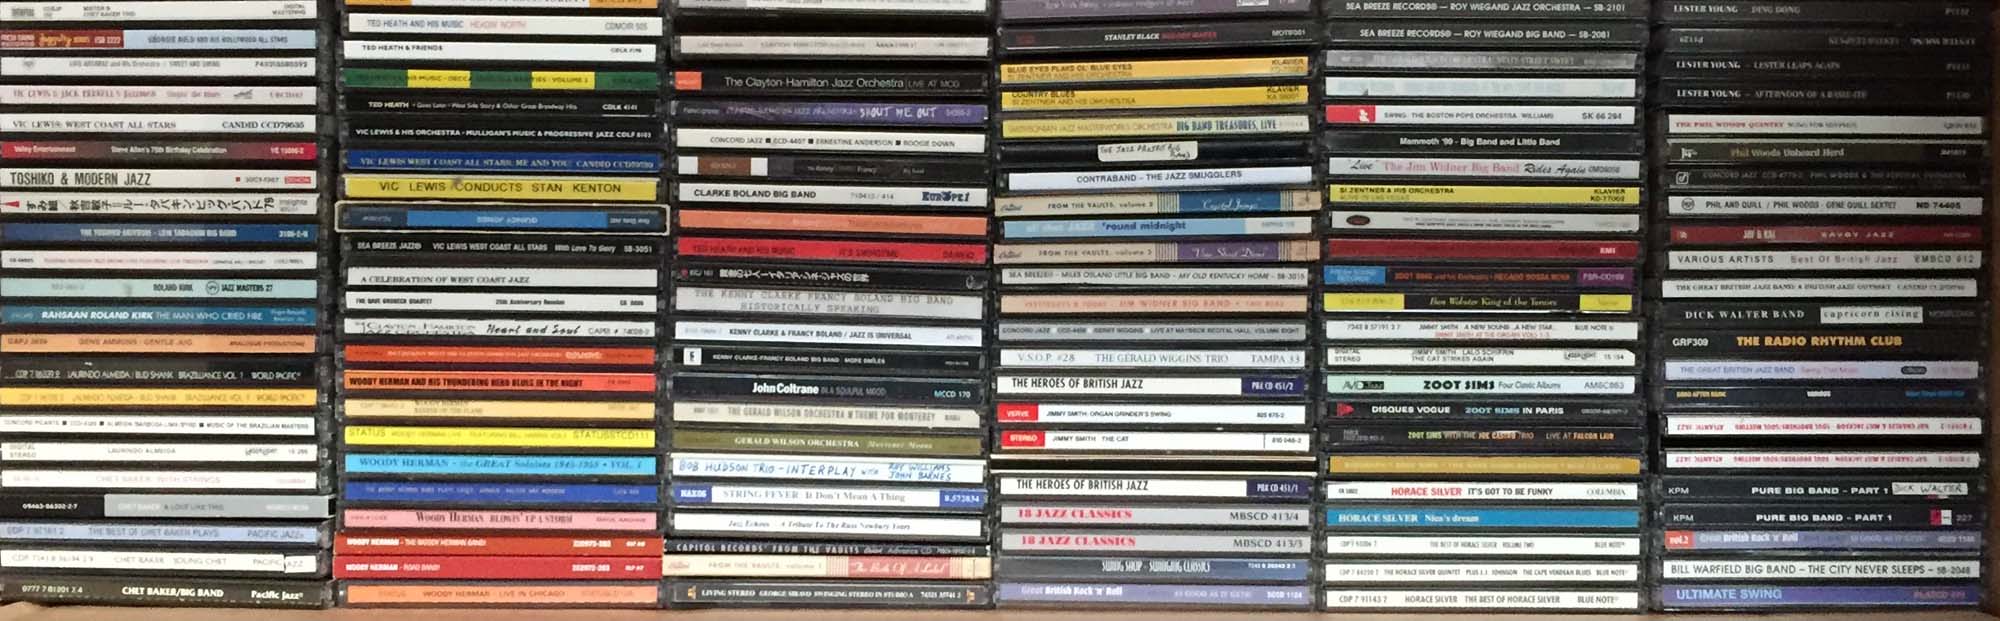 400 +JAZZ CDS. Excellent selection of Jazz CDs, with some box sets likely included. - Image 5 of 13